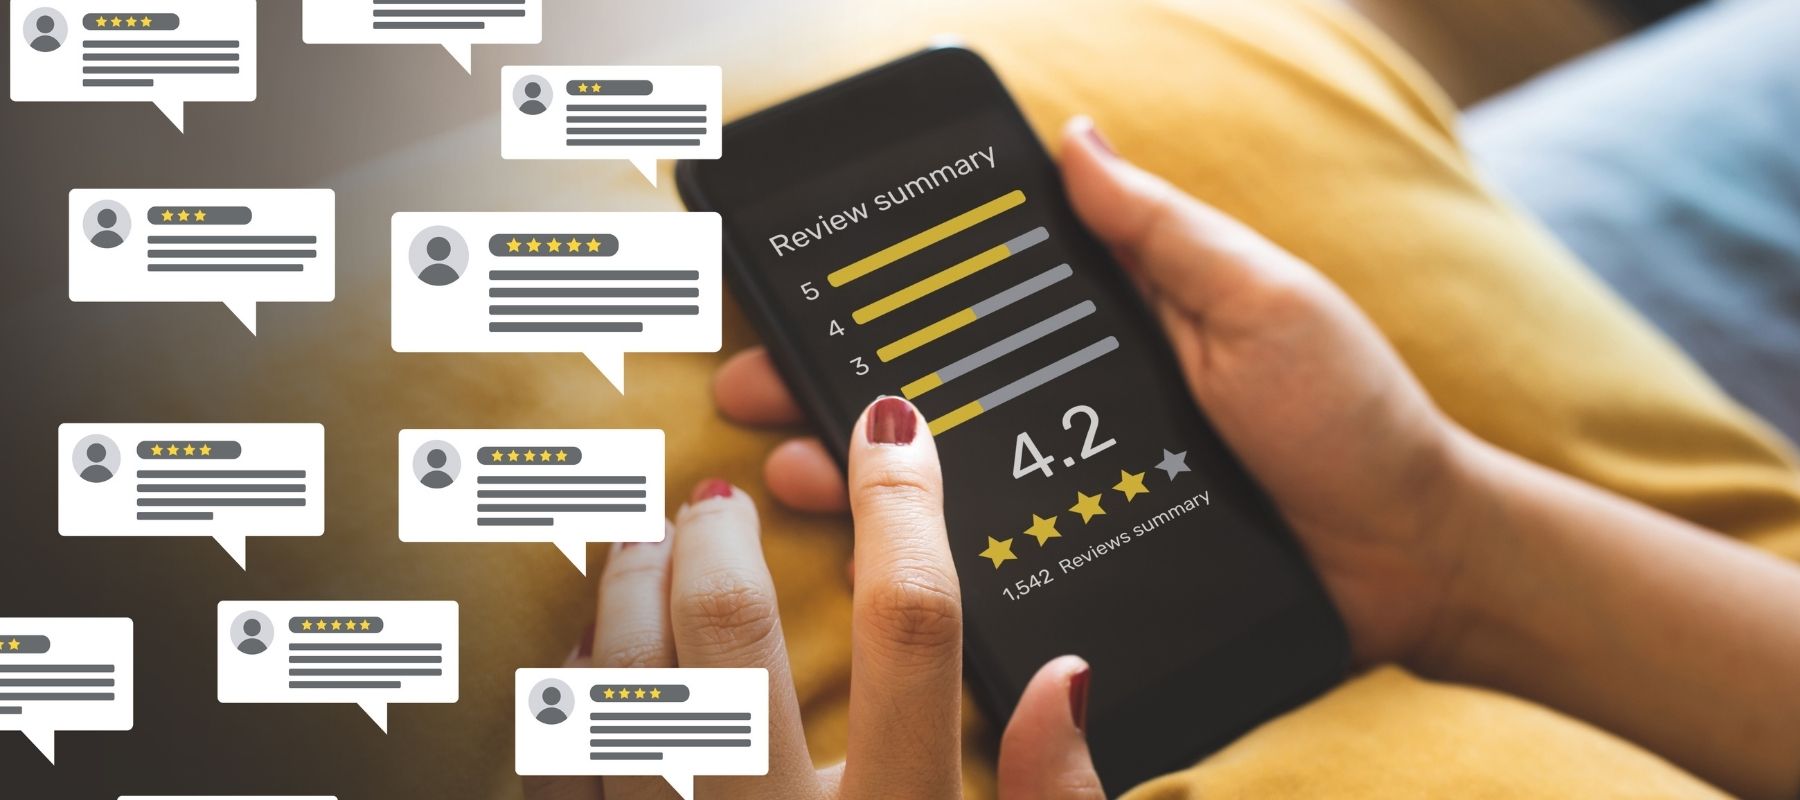 Leveraging the Review Widget Effectively